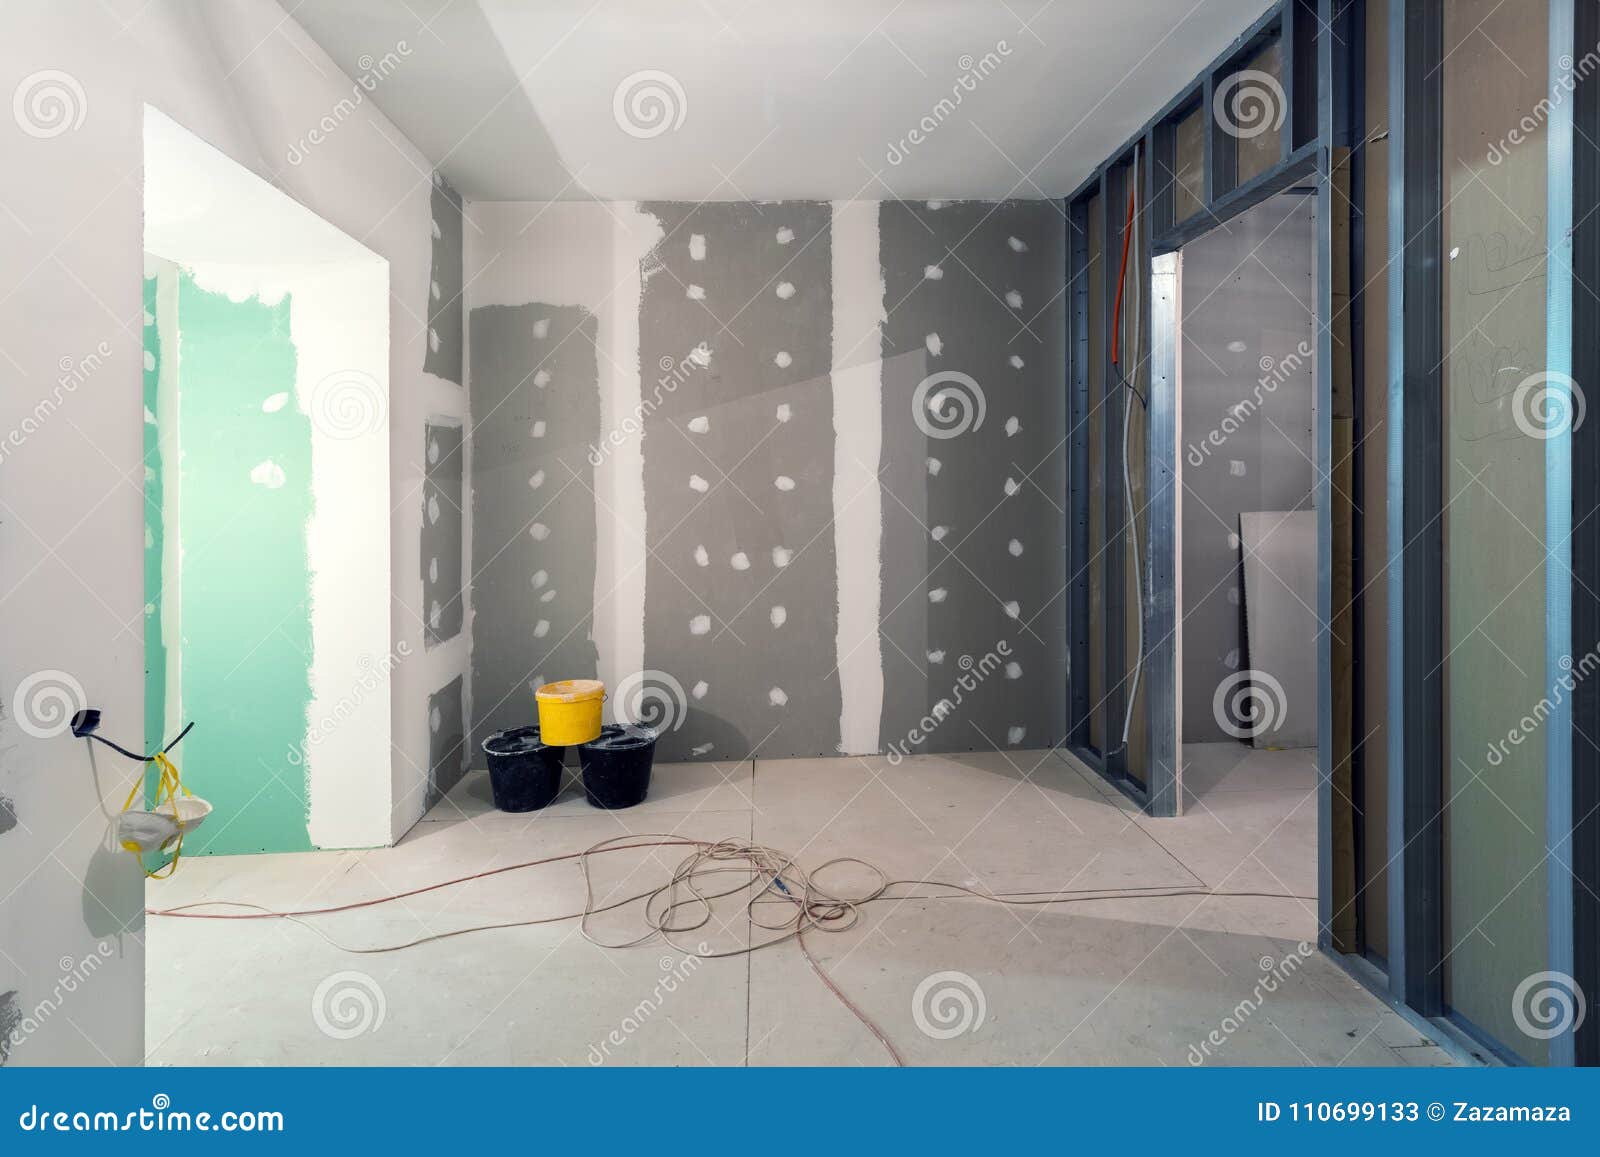 metal frames and plasterboard drywall for gypsum walls, three buckets and electric wires in apartment is under construction